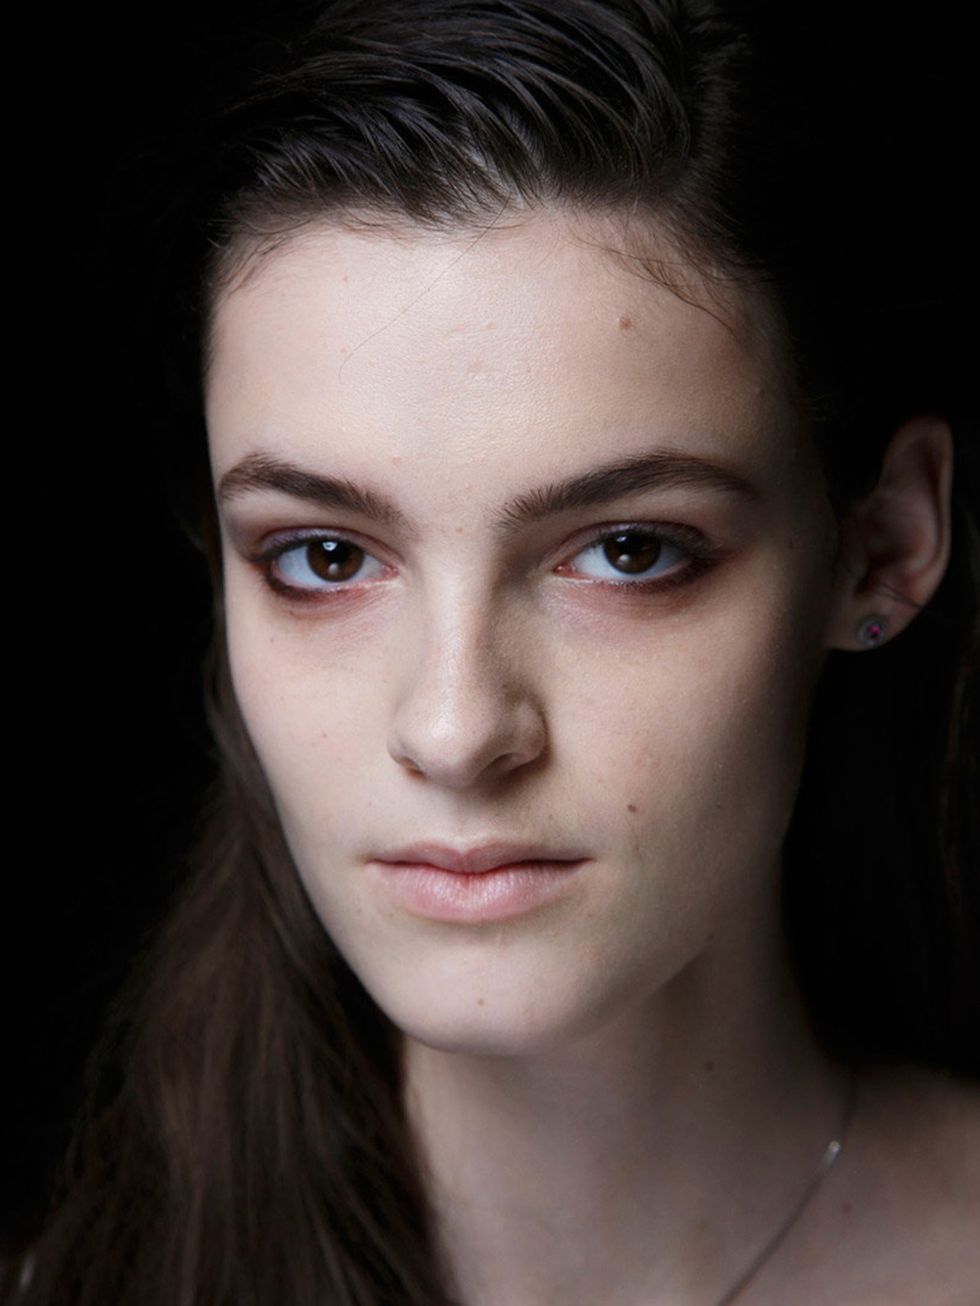 &lt;p&gt;&lt;strong&gt;Make-up Artist:&lt;/strong&gt; Diane Kendal for Nars&lt;/p&gt;&lt;p&gt;&lt;strong&gt;Look:&lt;/strong&gt; Copper Undersmoke&lt;/p&gt;&lt;p&gt;&lt;strong&gt;Inspiration:&lt;/strong&gt; North West American girls; Patagonia comes to Ne